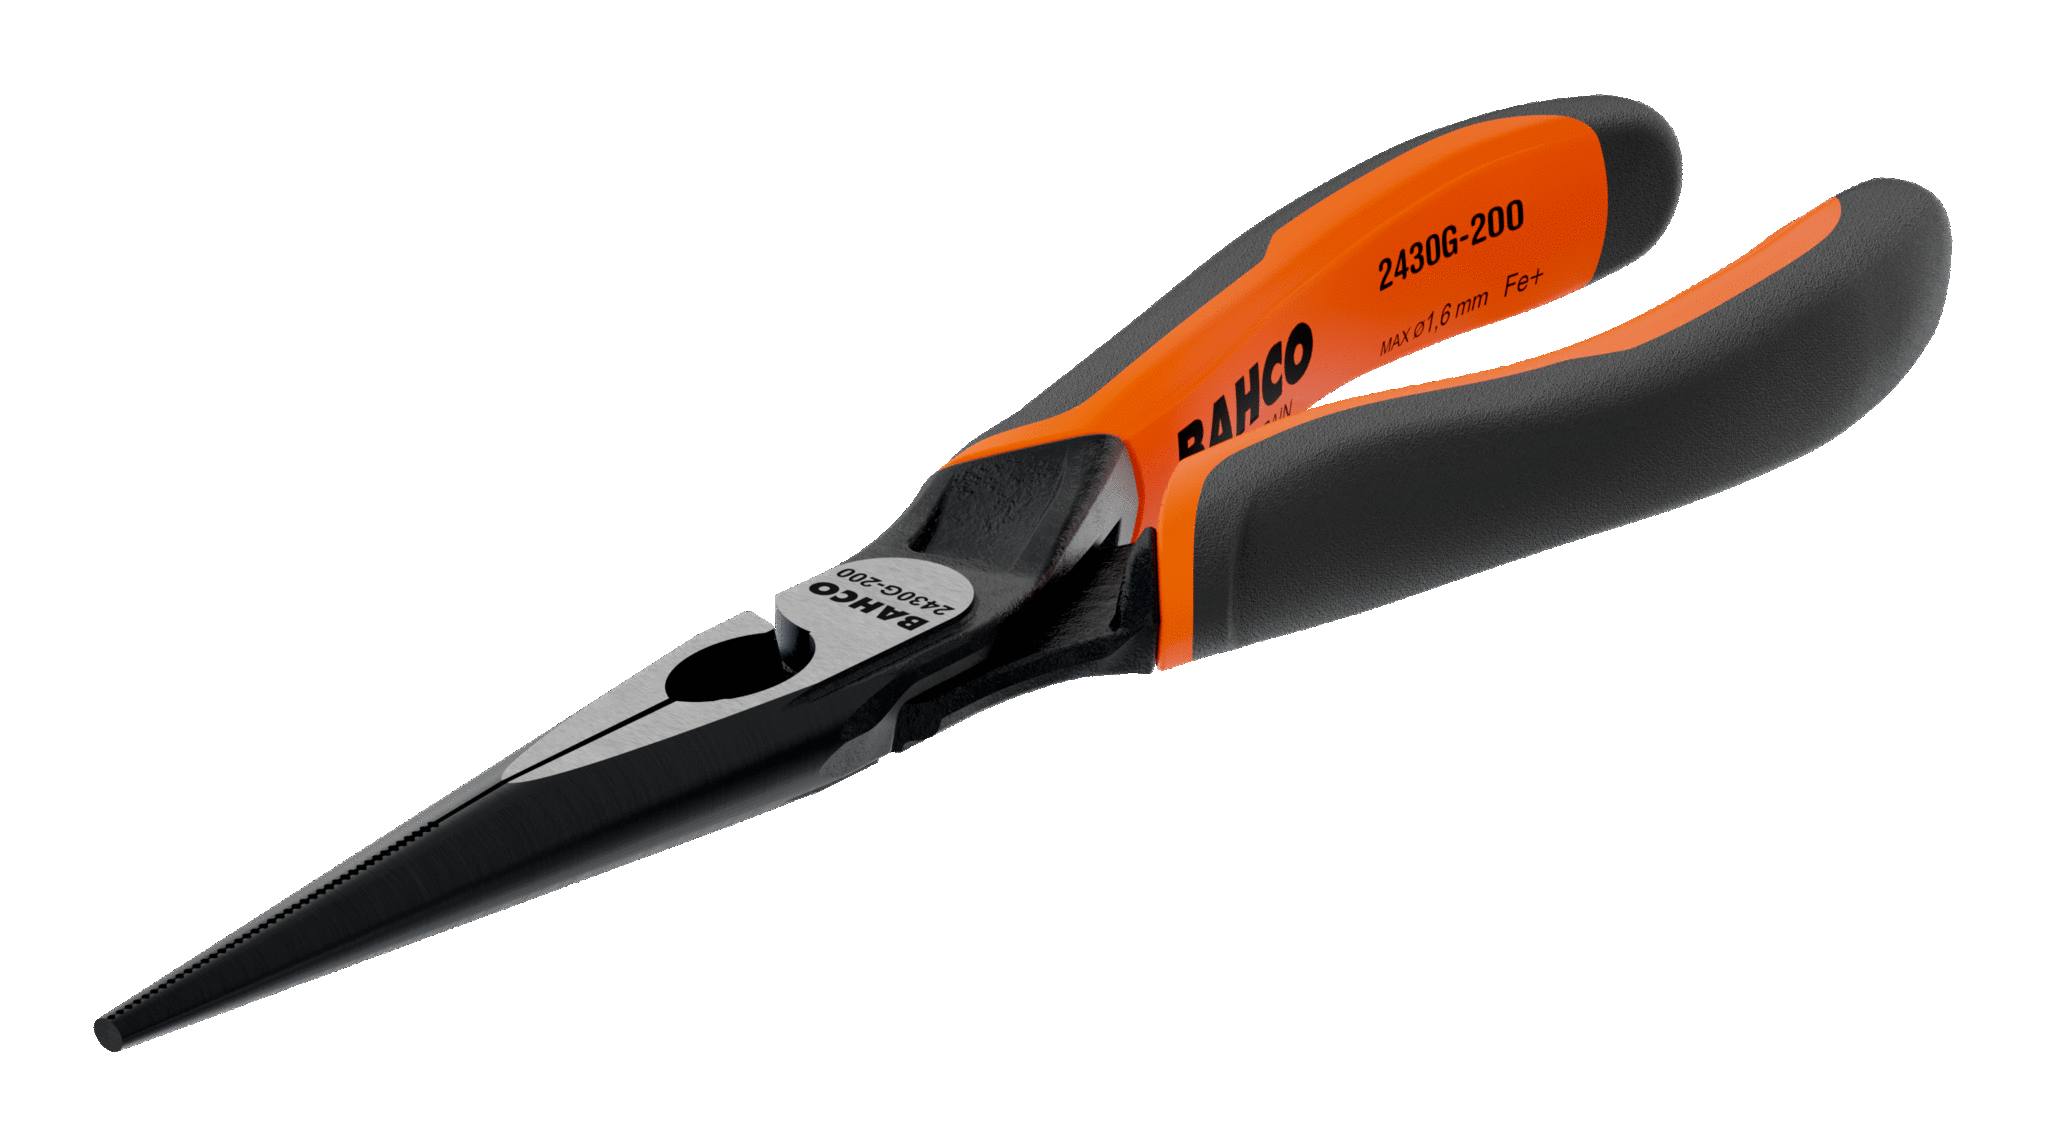 ERGO™ Long Snipe Nose Pliers with Self-Opening Dual-Component Handles and Phosphate Finish - 2430-G-160 by Bahco